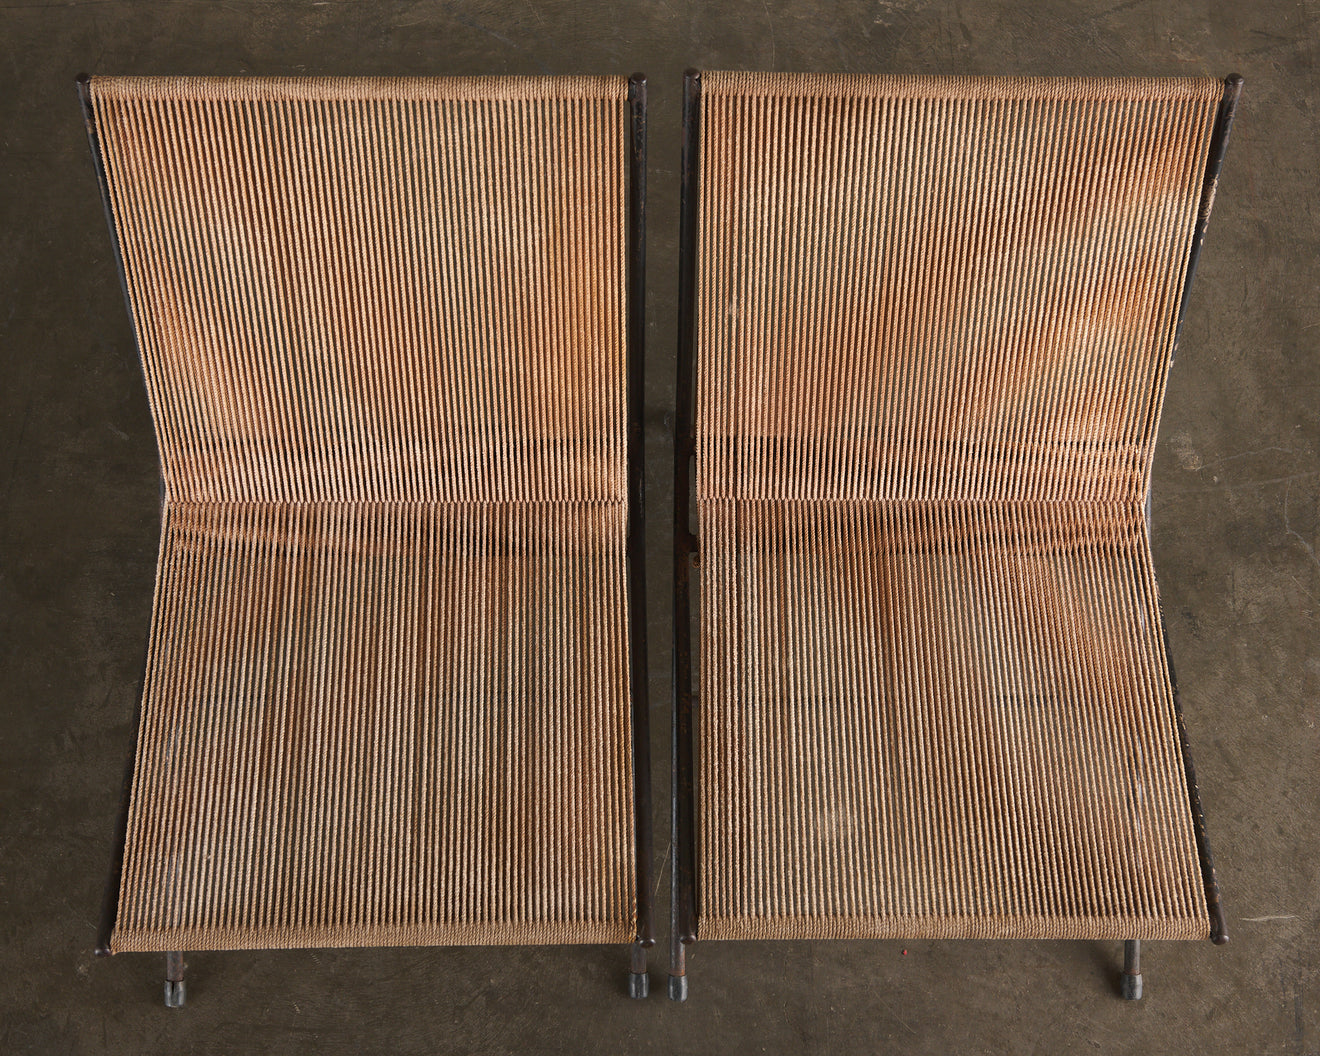 PAIR OF ALLAN GOULD STRING CHAIRS